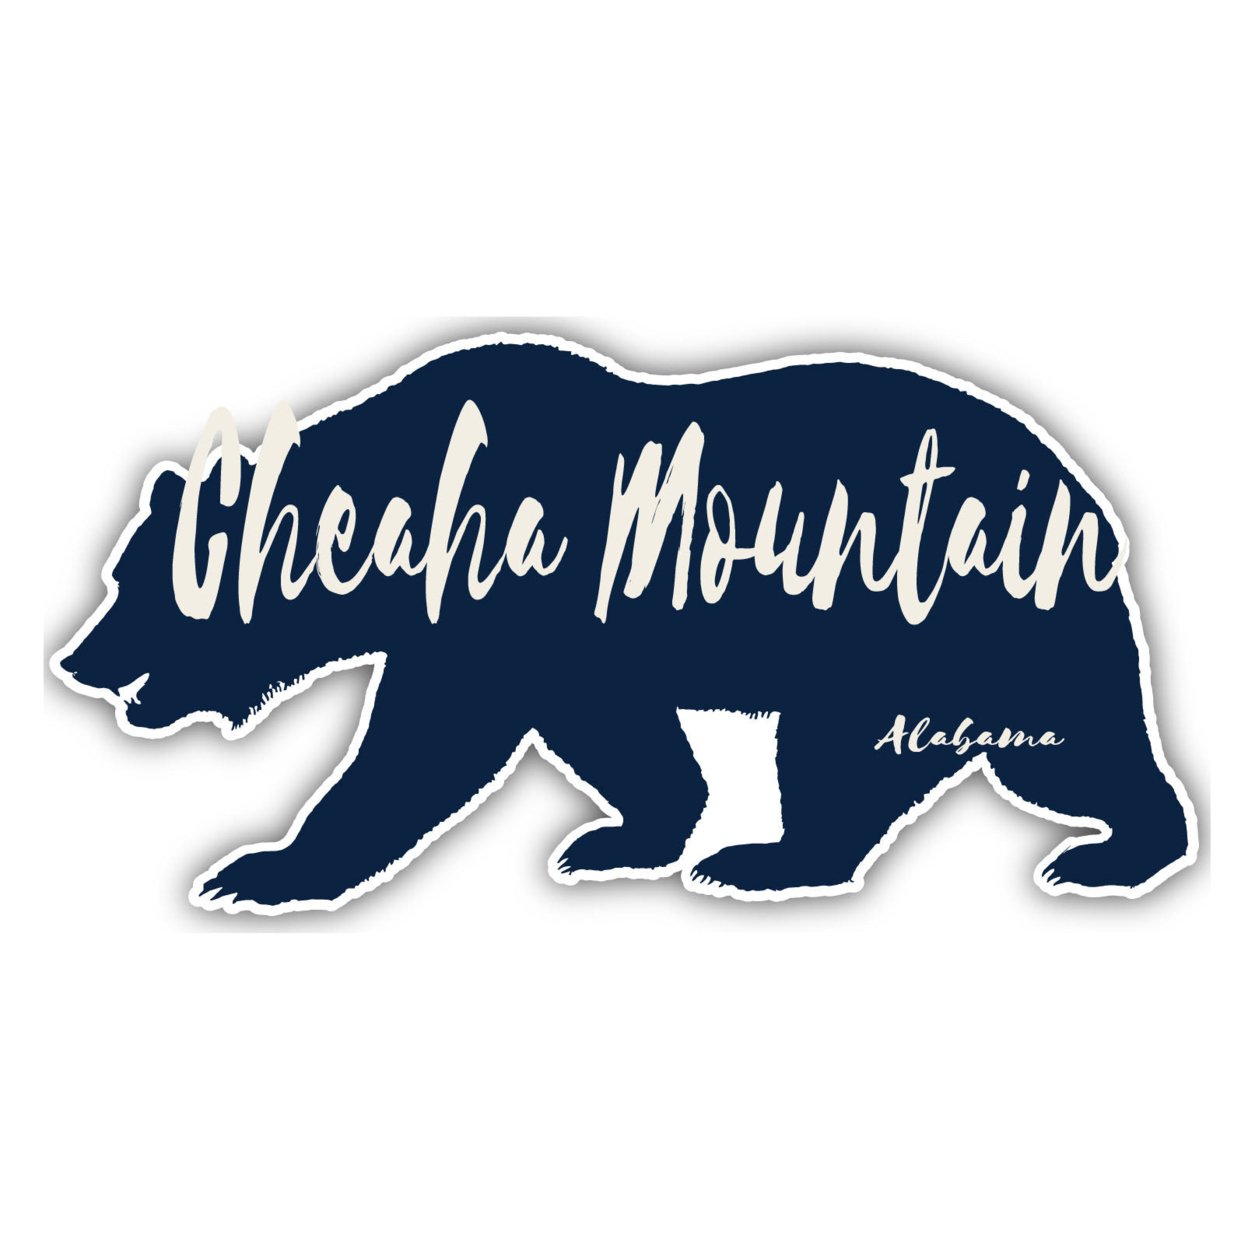 Cheaha Mountain Alabama Souvenir Decorative Stickers (Choose Theme And Size) - 4-Pack, 10-Inch, Bear